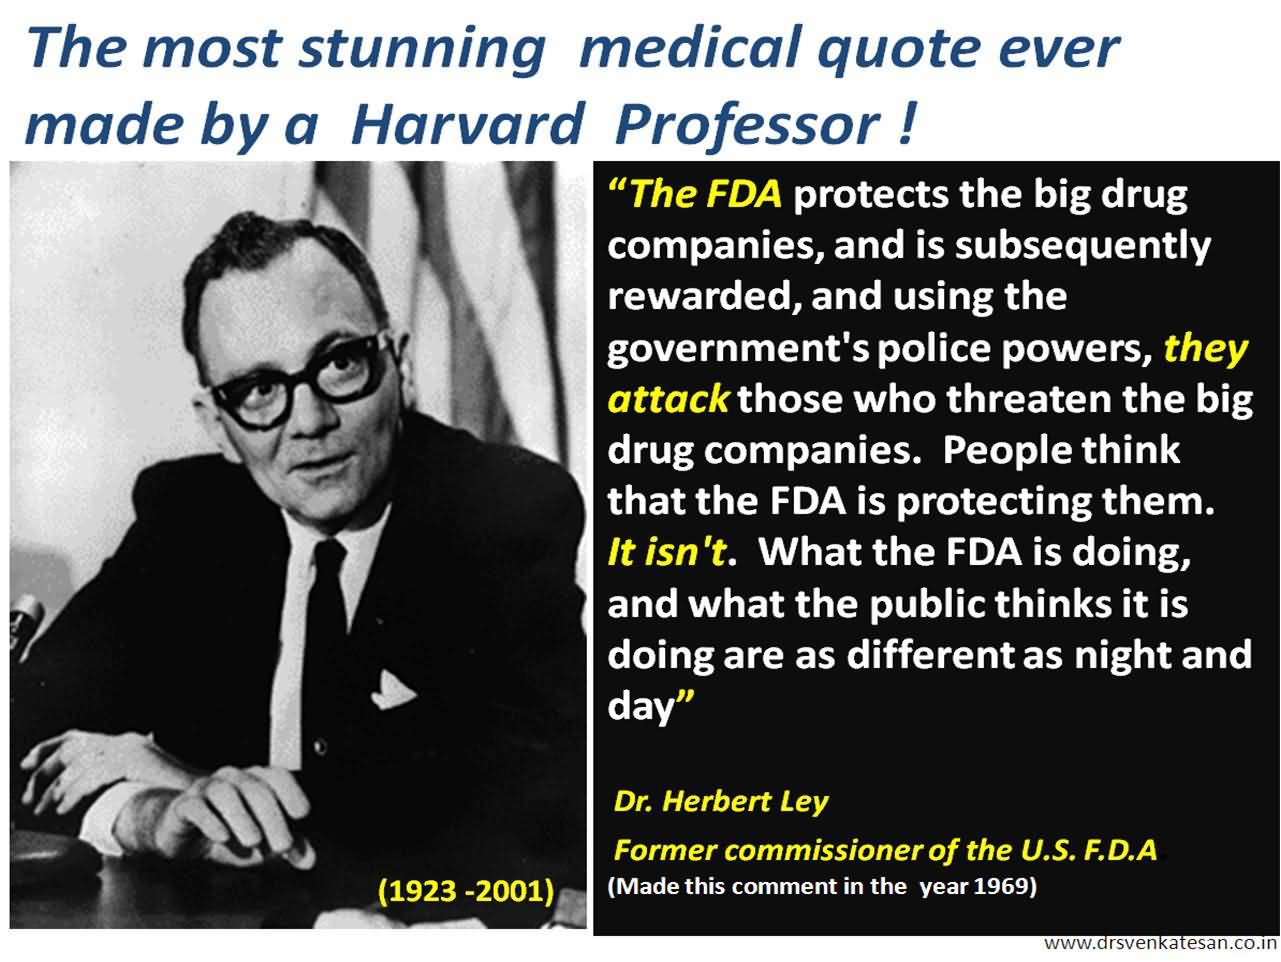 The FDA ‘protects’ the big drug companies and are subsequently rewarded, and using the government’s police powers they attack those who … Dr. herbert Ley